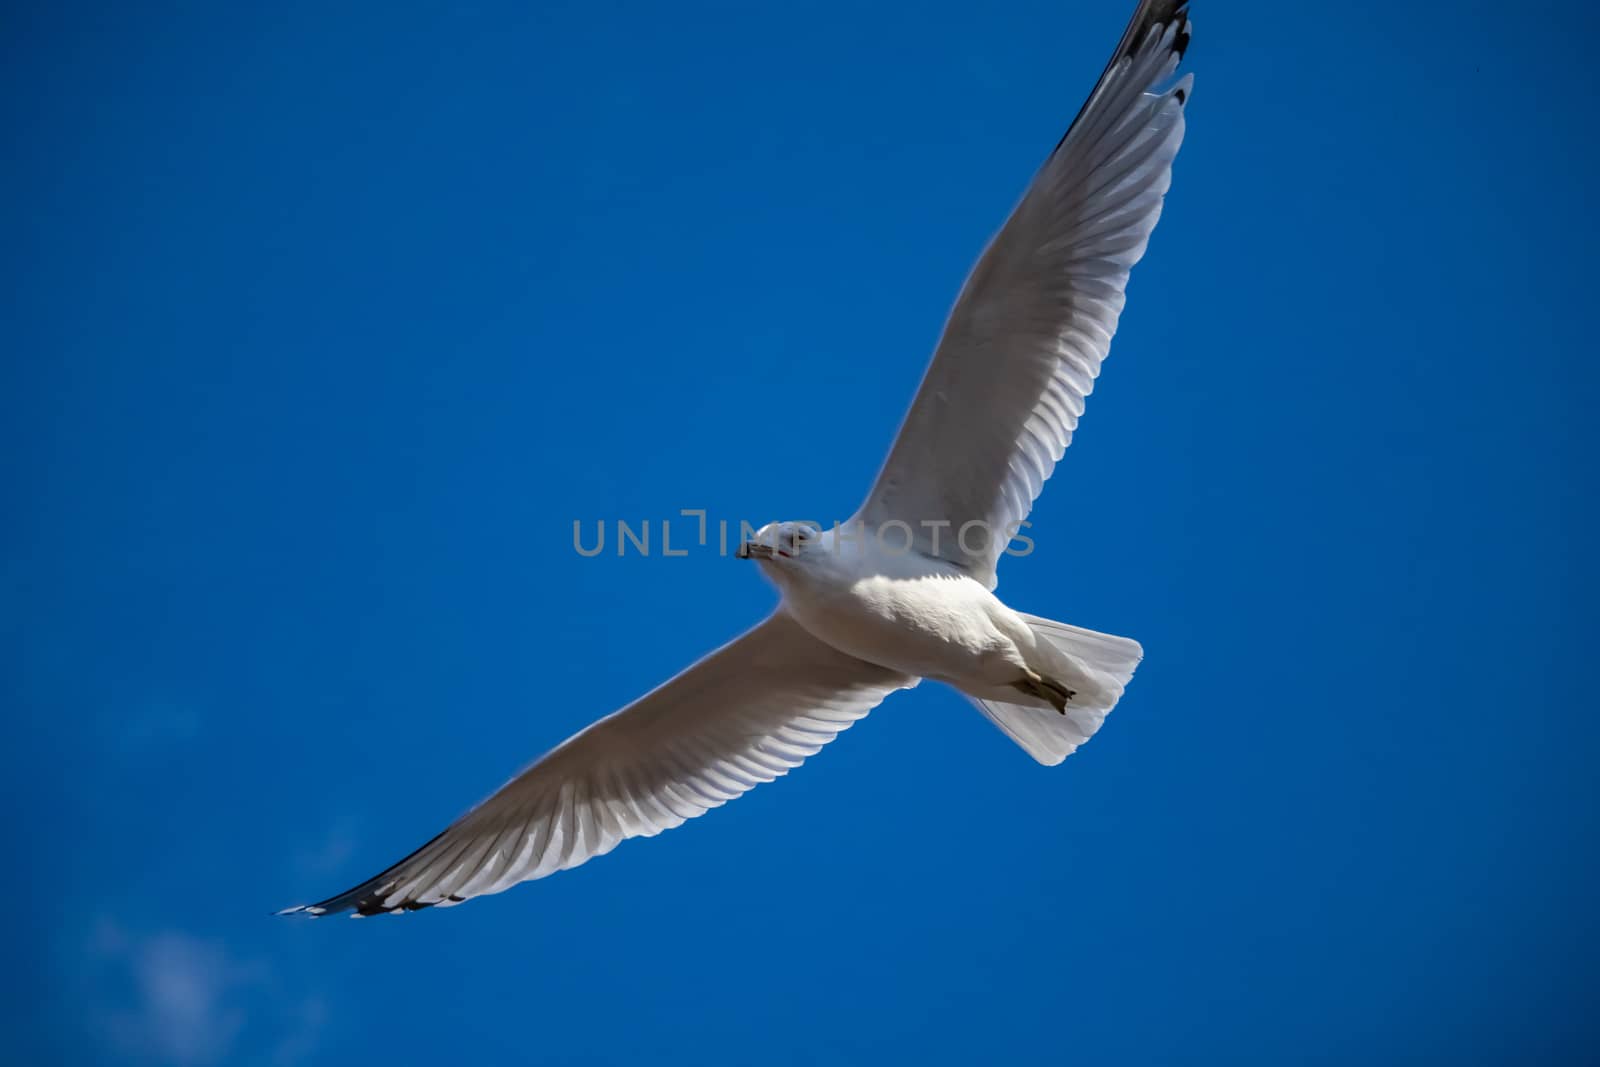 A seagull with its wings fully outstretched is gliding through the air in a blue sky, seen from below.